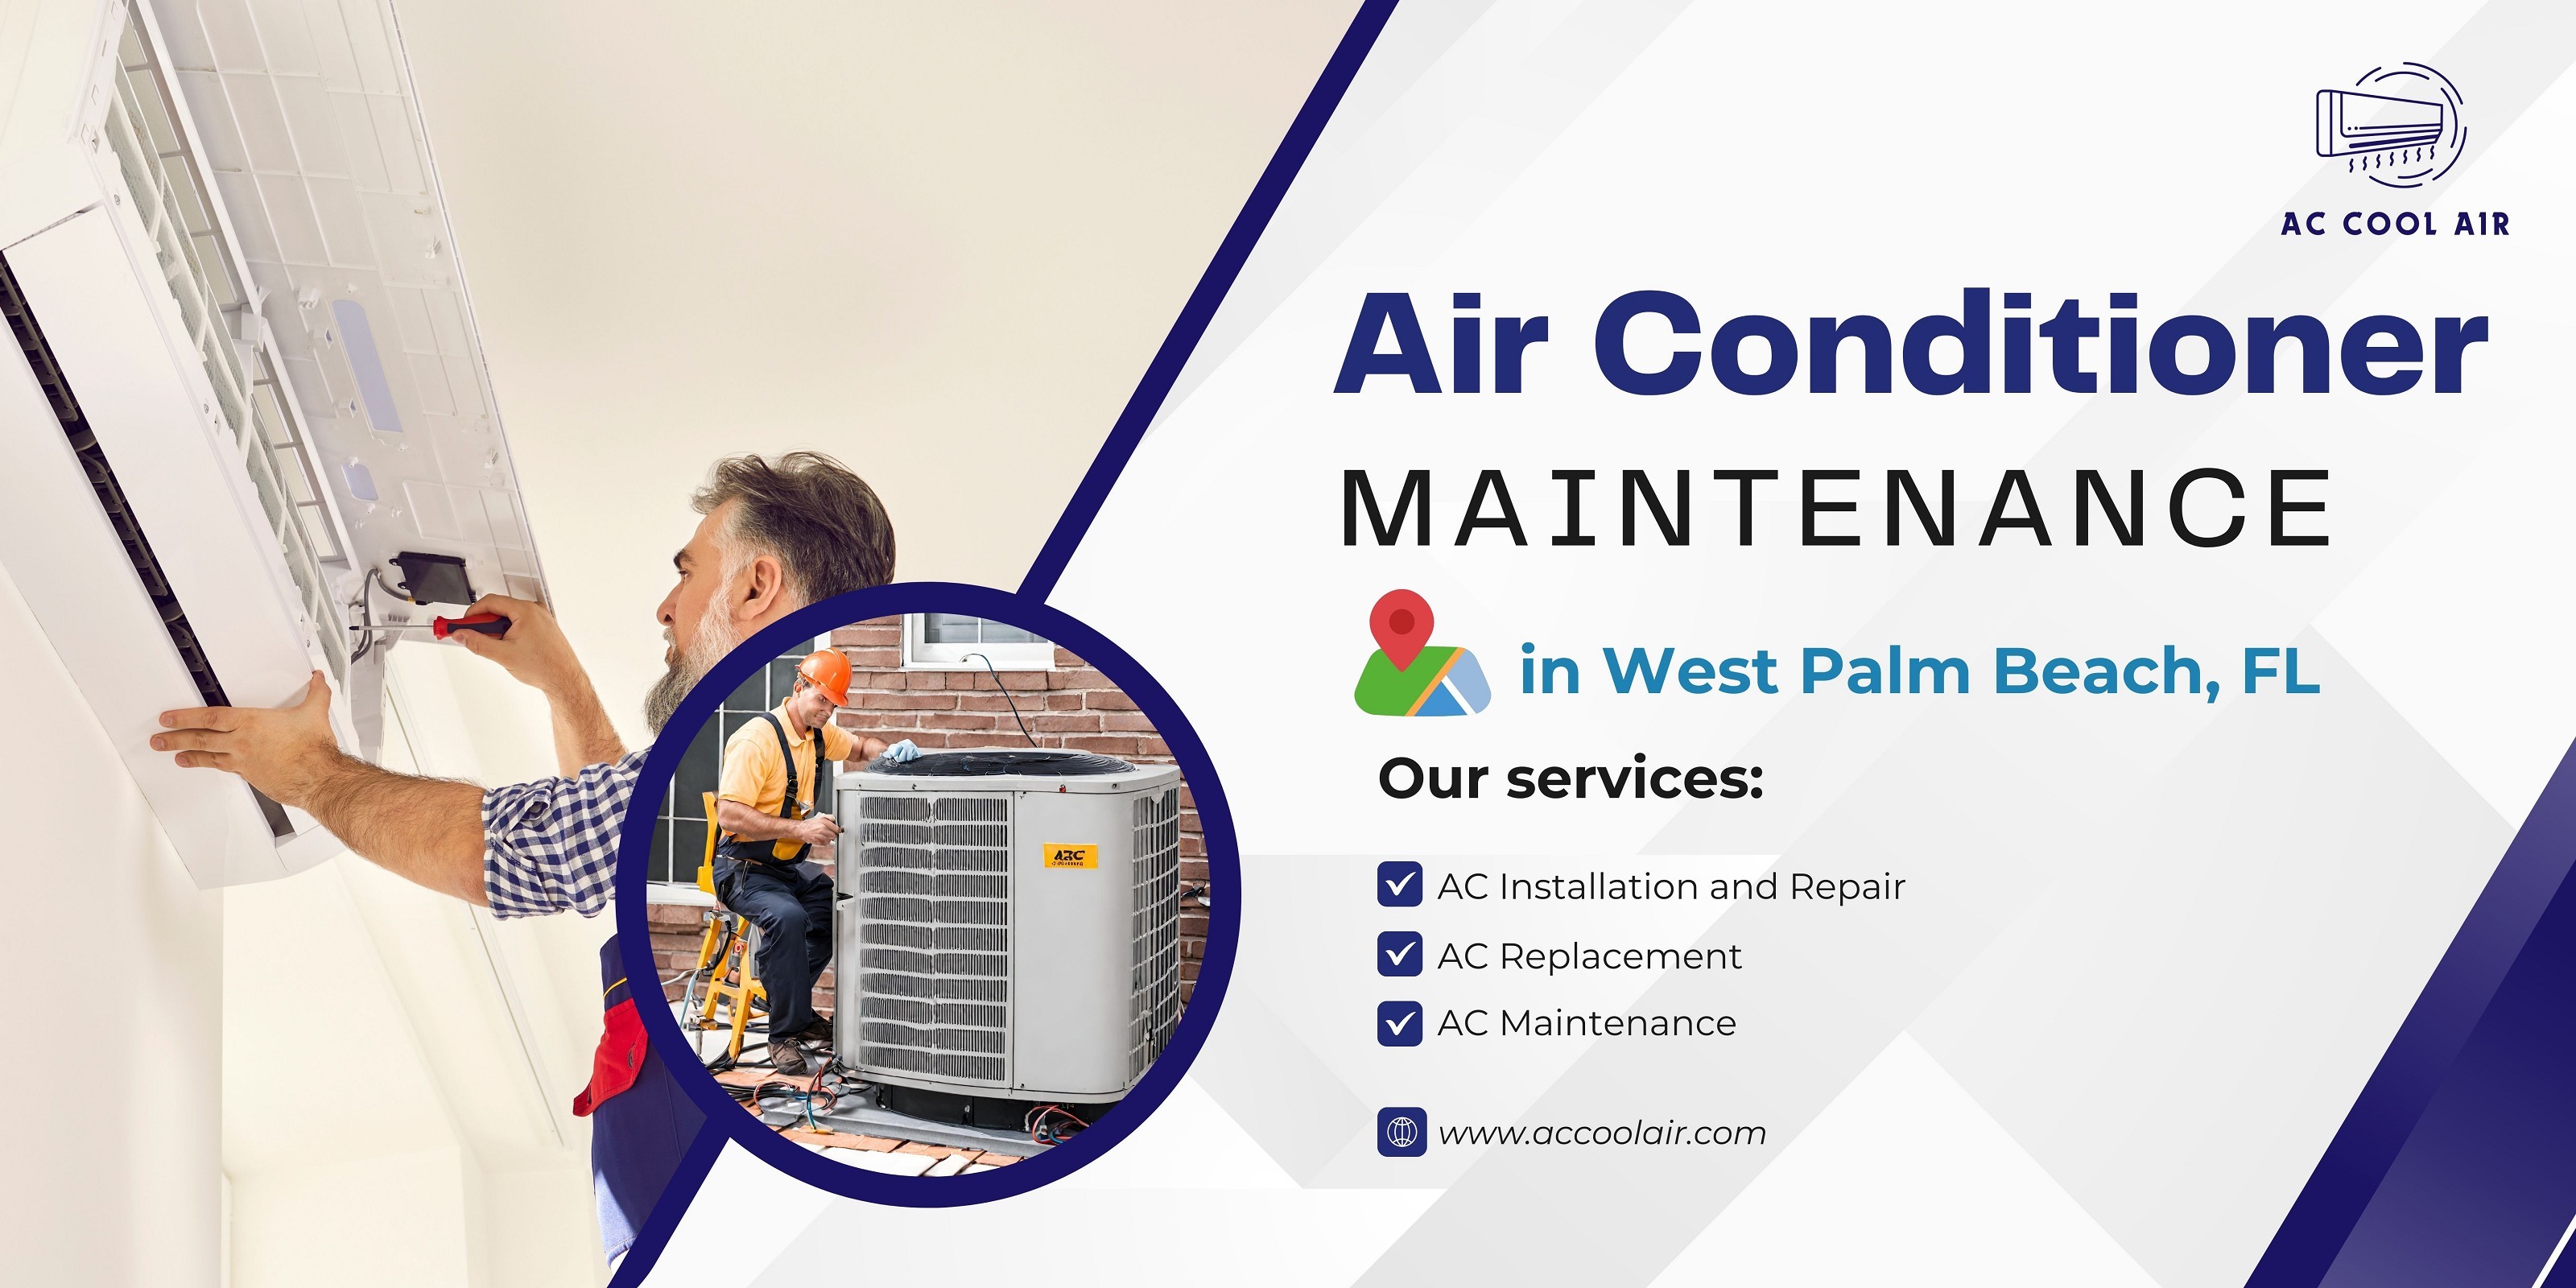 Proactive AC Maintenance Solutions | AC COOL AIR in West Palm Beach, FL